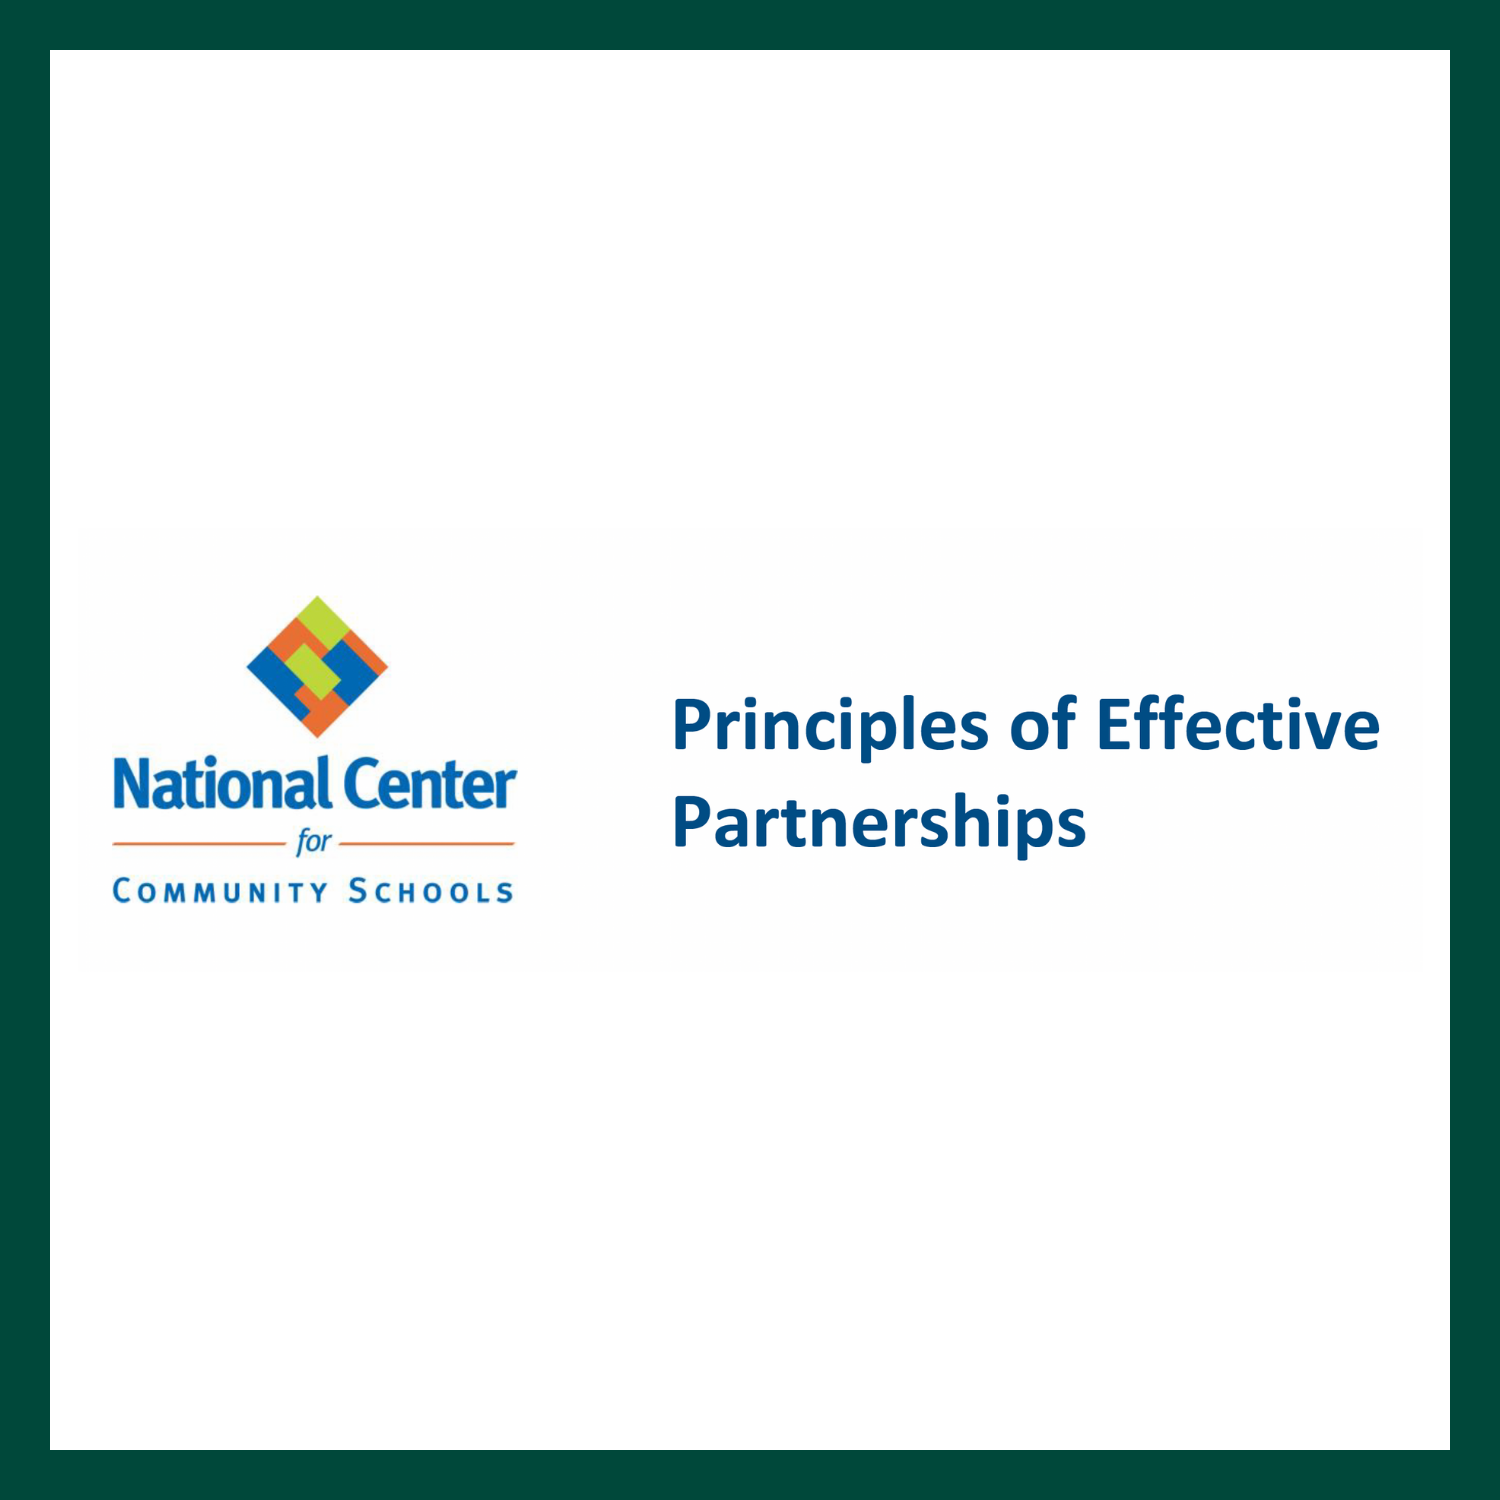 National Center for Community Schools logo with a colorful diamond above and "Principles of Effective Partnerships" written next to the logo.